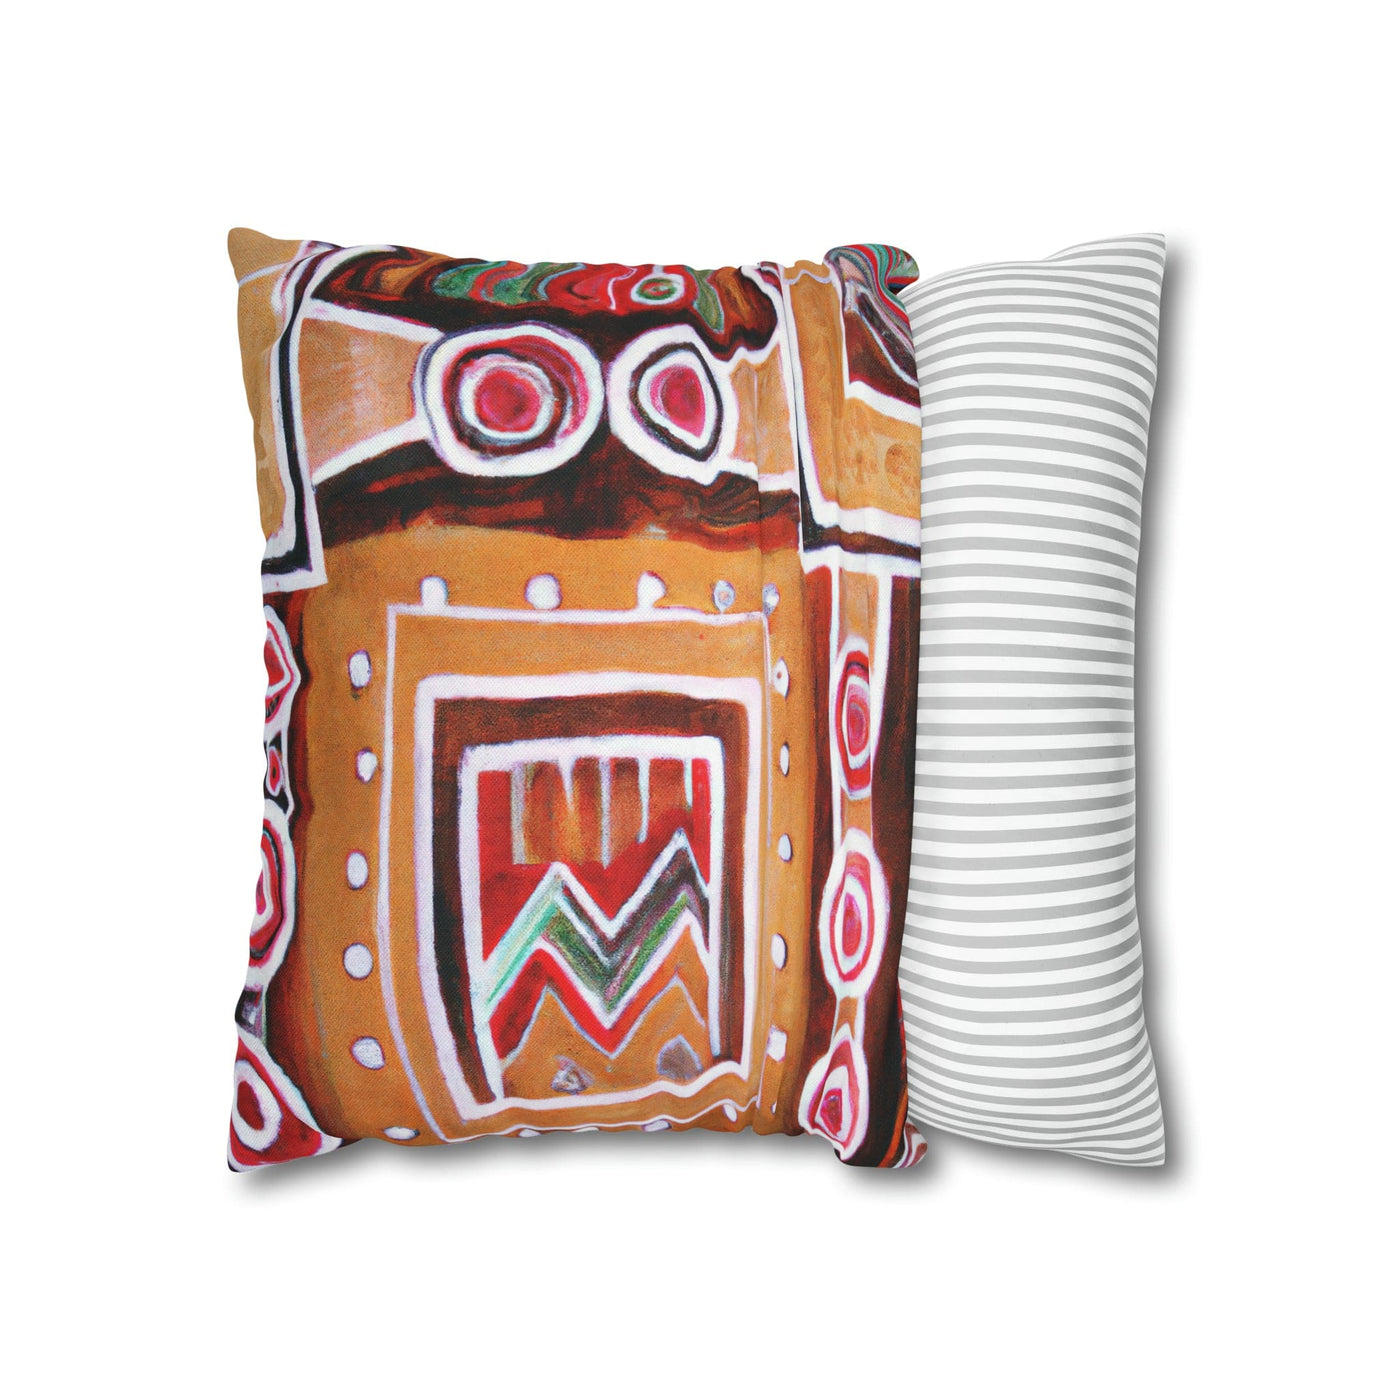 Decorative Throw Pillow Covers With Zipper - Set Of 2 Brown Orange Green Aztec